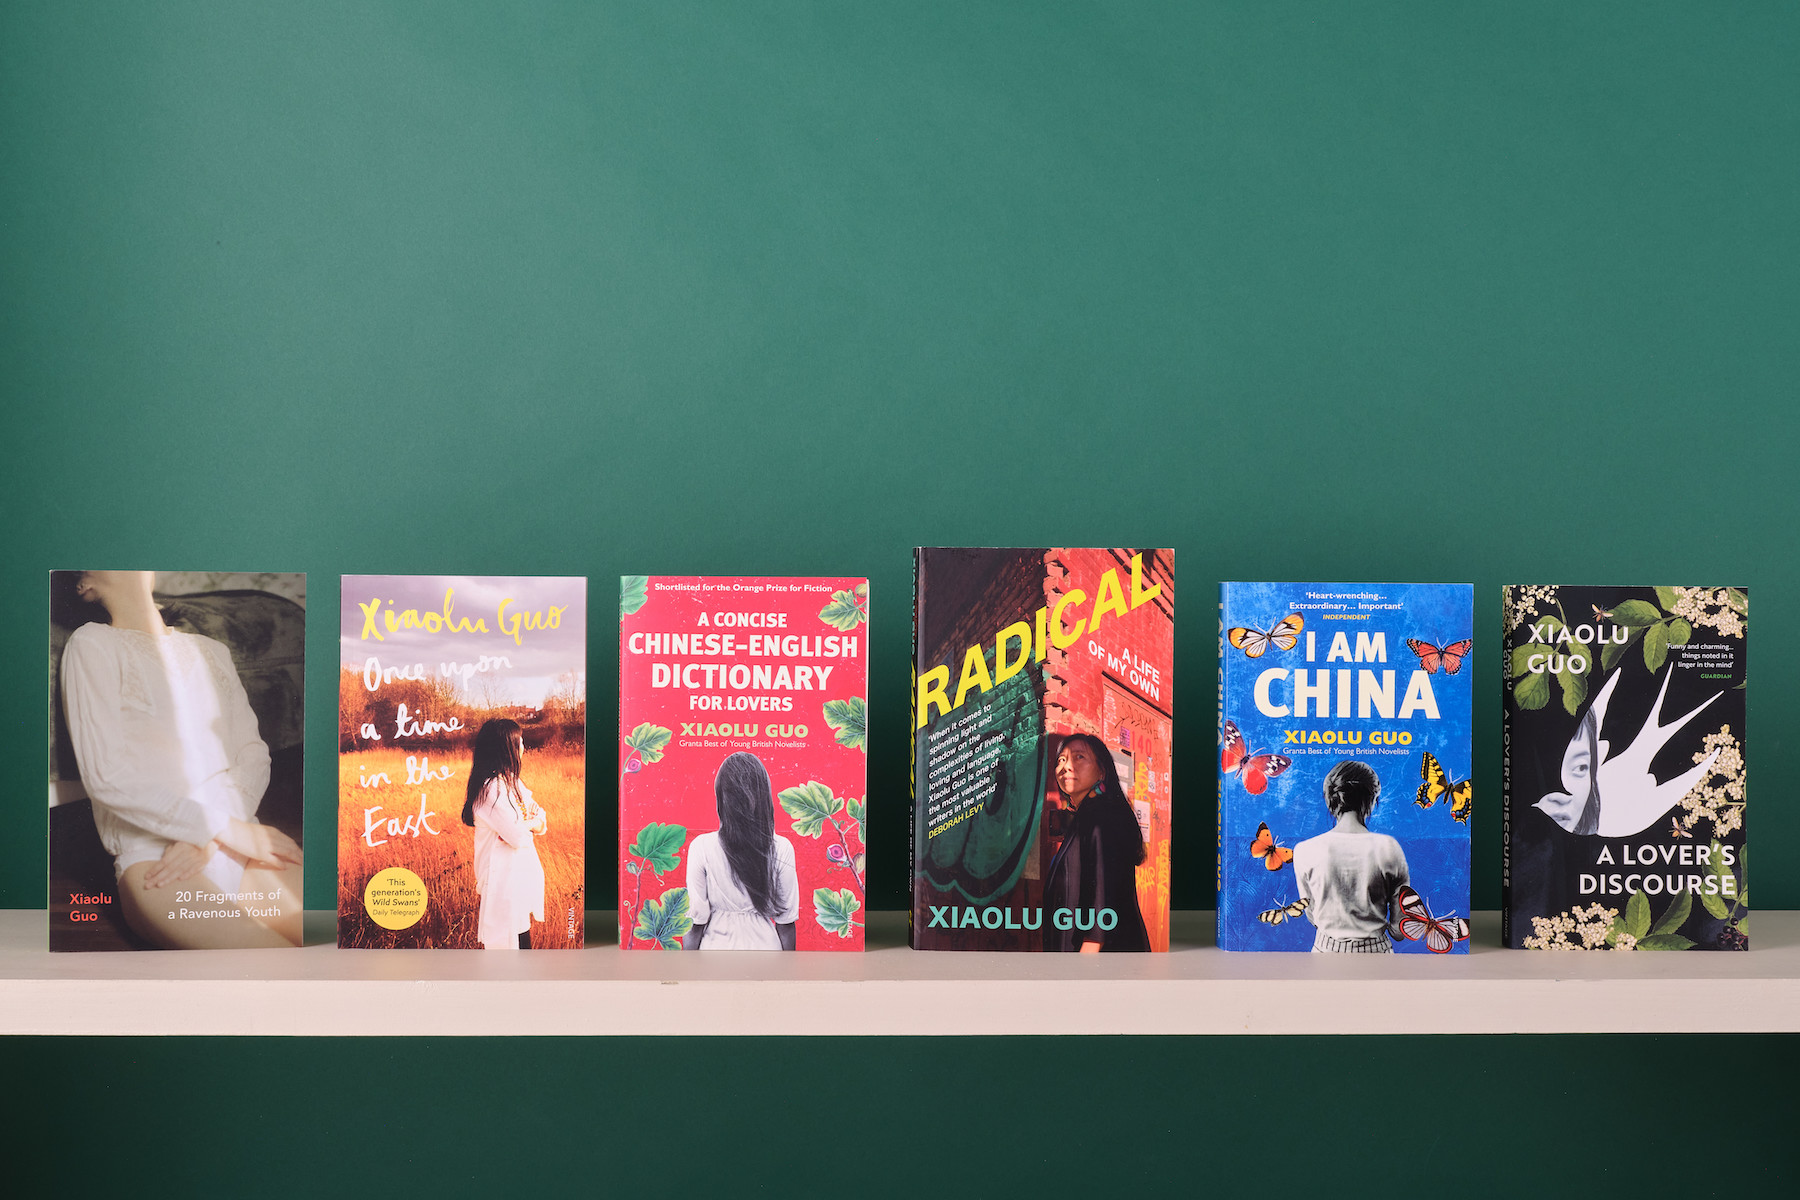 Six of Xiaolu Guo's books on a white shelf in front of a green background